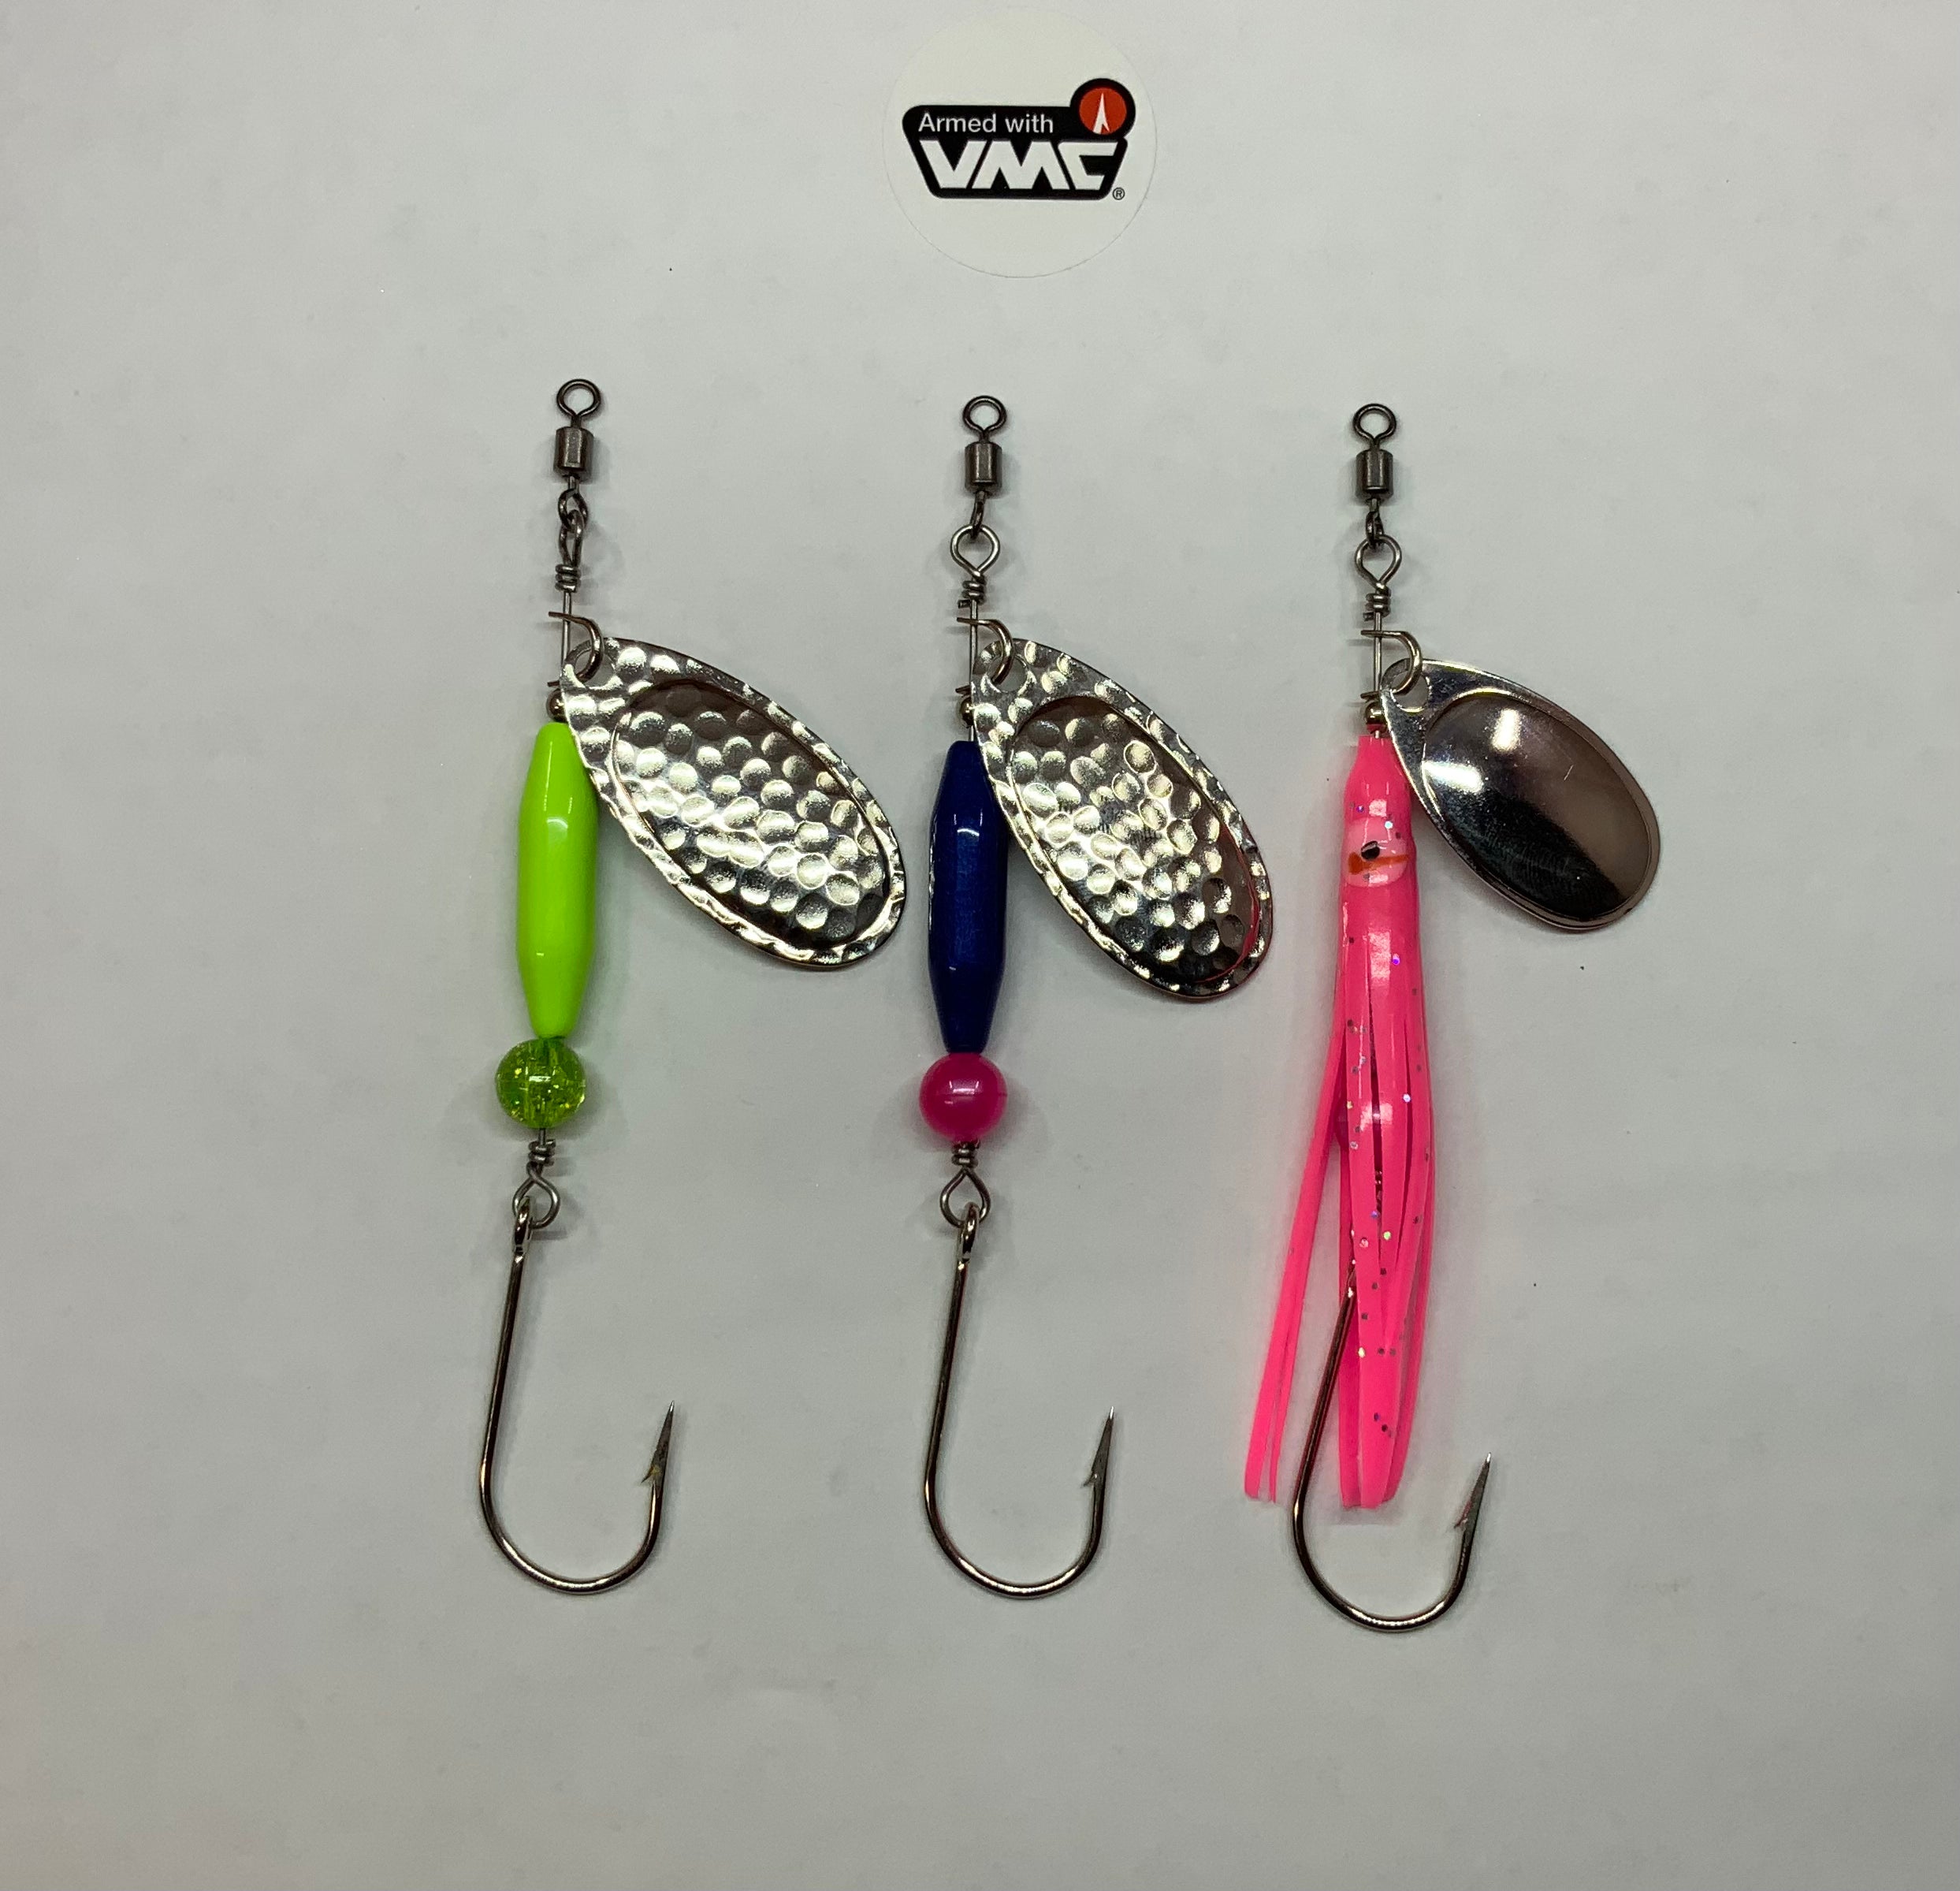 Spinner (3) Pack, $17.50, Spin-X Designs Tackle